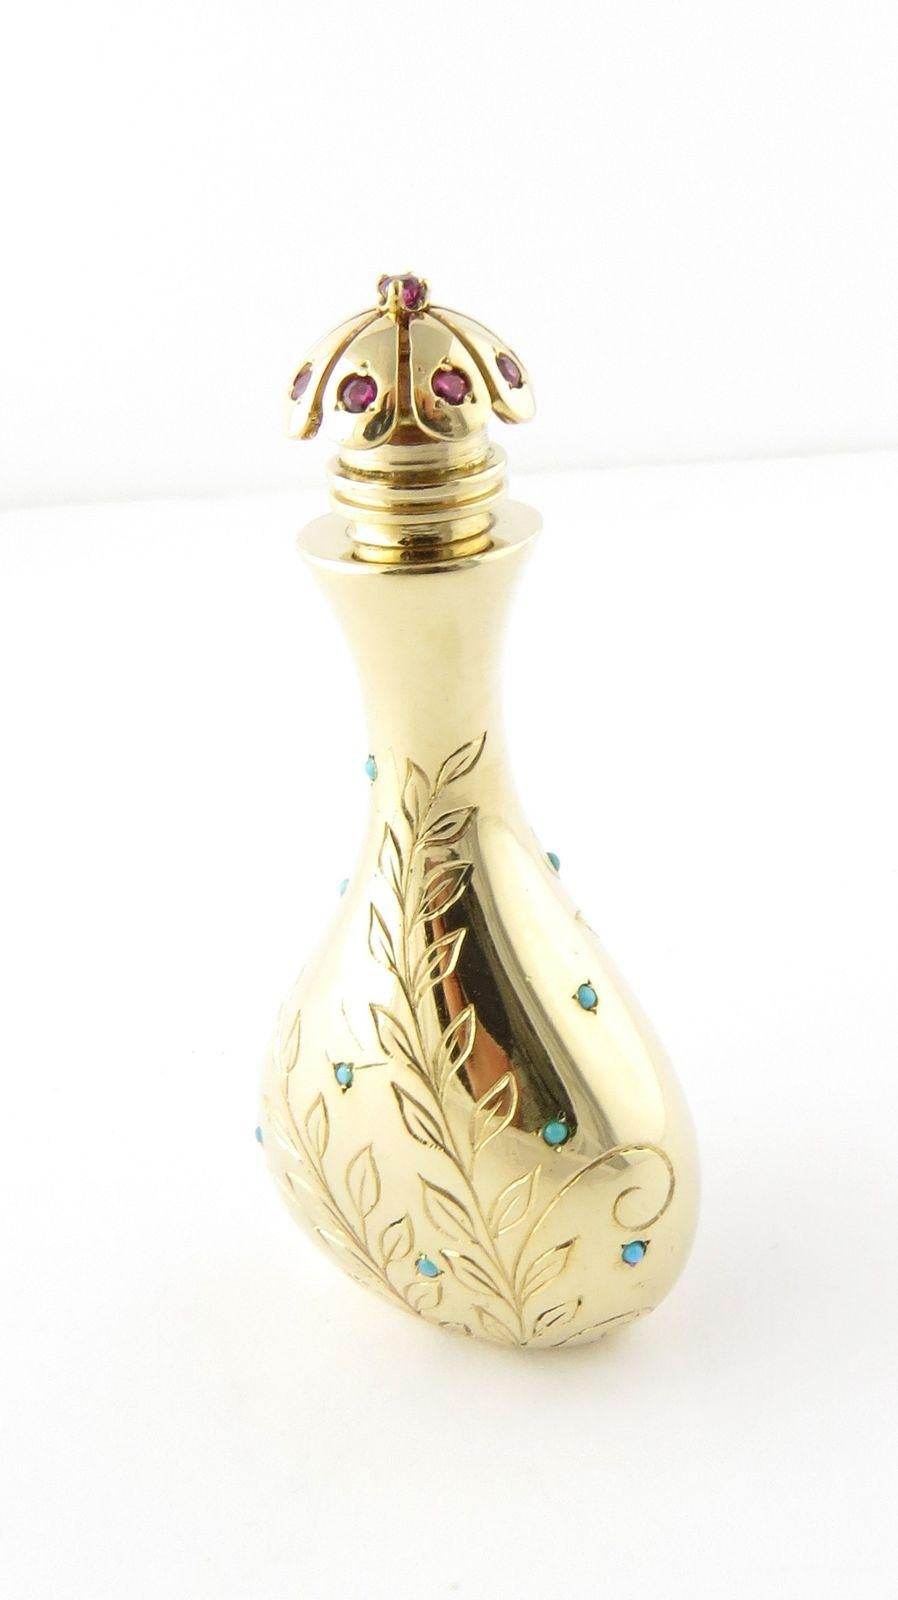 John Rubel Co. Vintage 14-karat yellow gold turquoise and ruby perfume bottle flacon
This beautiful piece was created by John Rubel Co., circa 1945.
John Rubel also designed jewelry for Van Cleef and Arpels
This perfume decanter is approx. 2.25